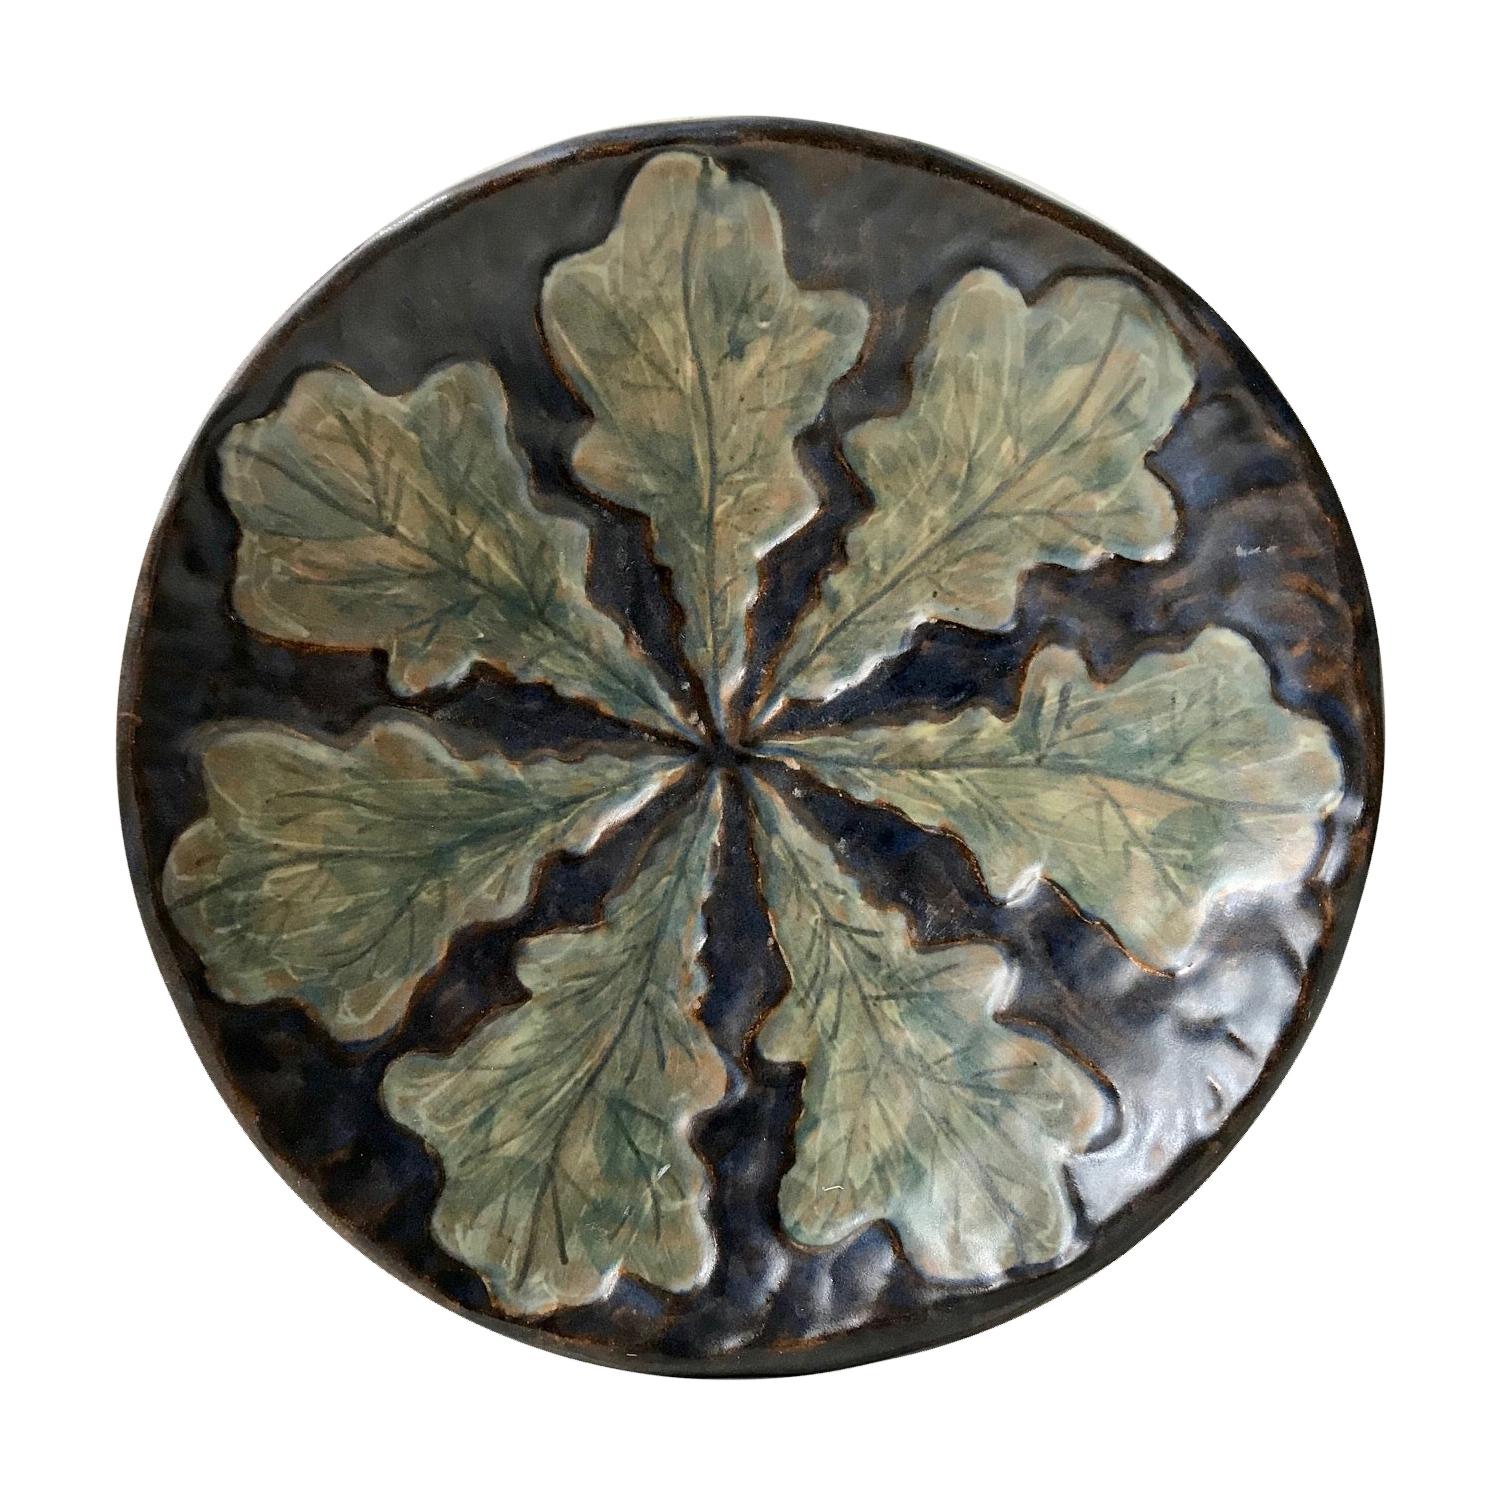 Art Deco Glazed Stoneware Dish with Leaves, Emil Ruge, 1930s